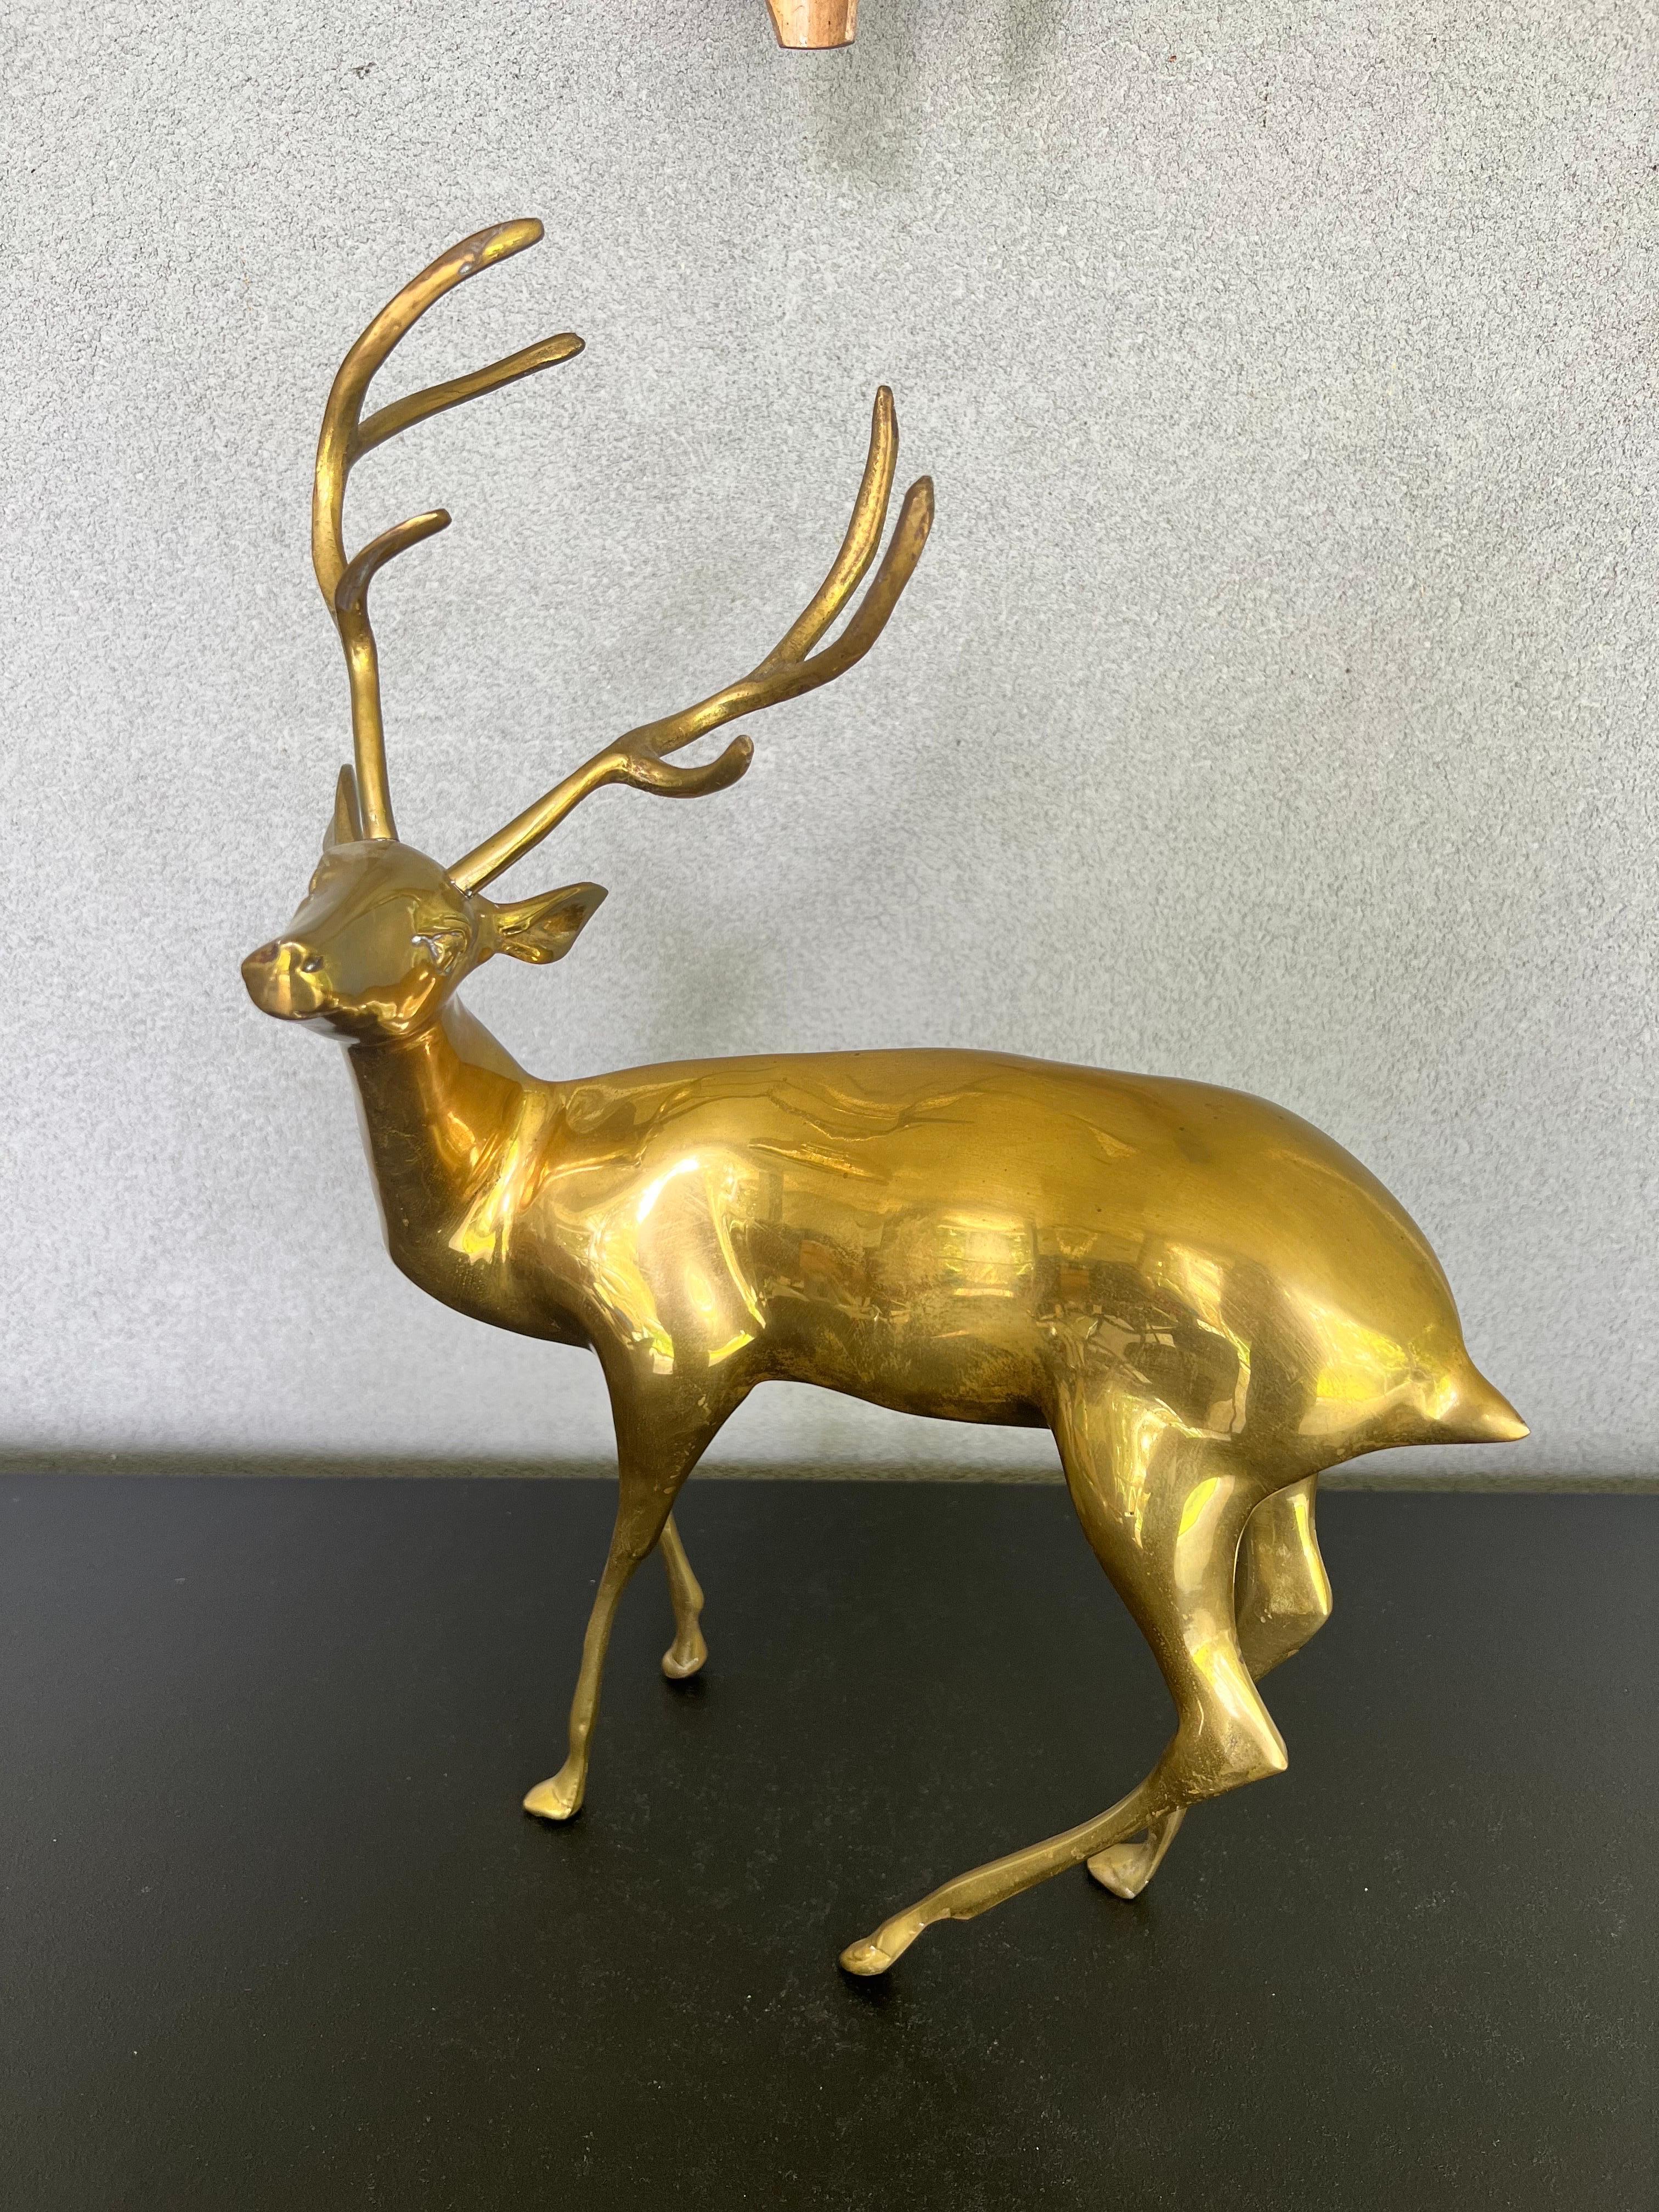 Beautiful Solid brass deer sculpture, perfect decoration for a shelving unit, entry table or fireplace mantle 
vintage decor sets your home apart with unique items !